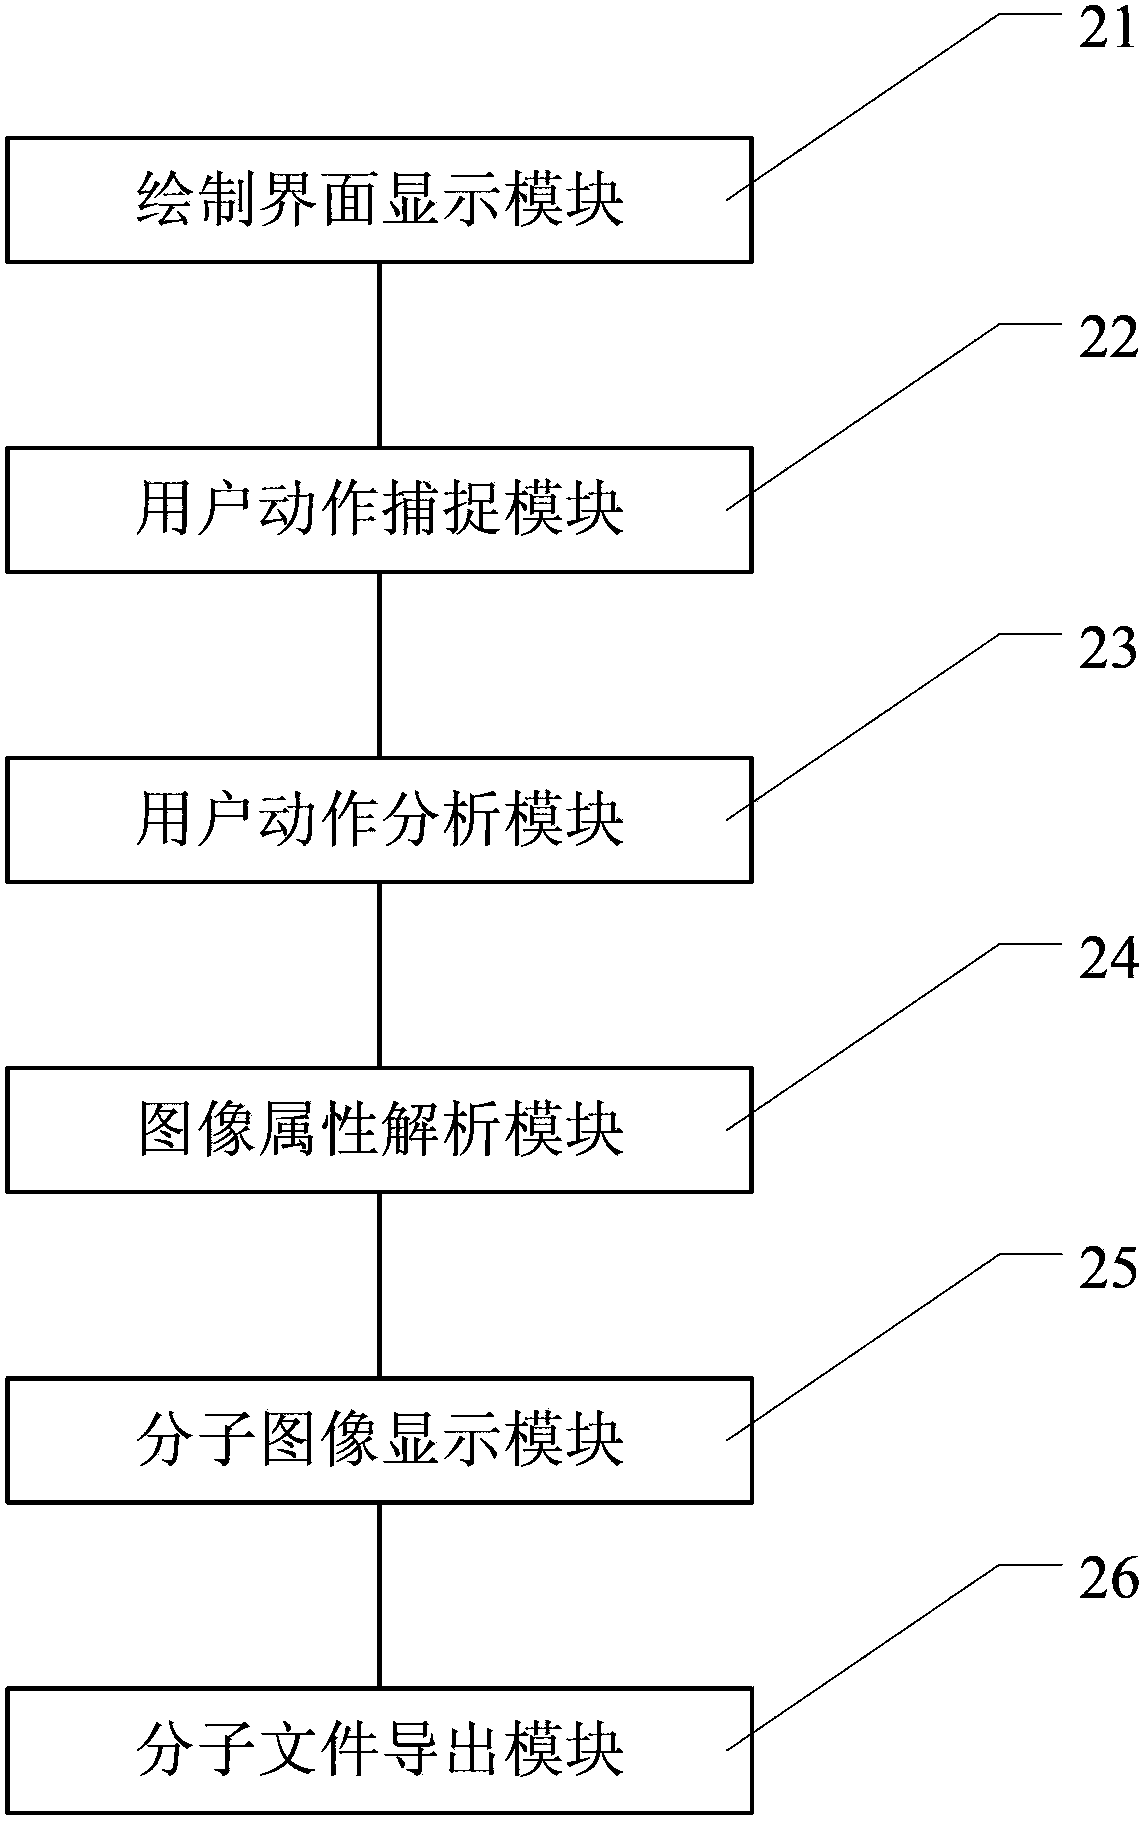 Method and system for drawing chemical micro molecules on Web based on Java Script